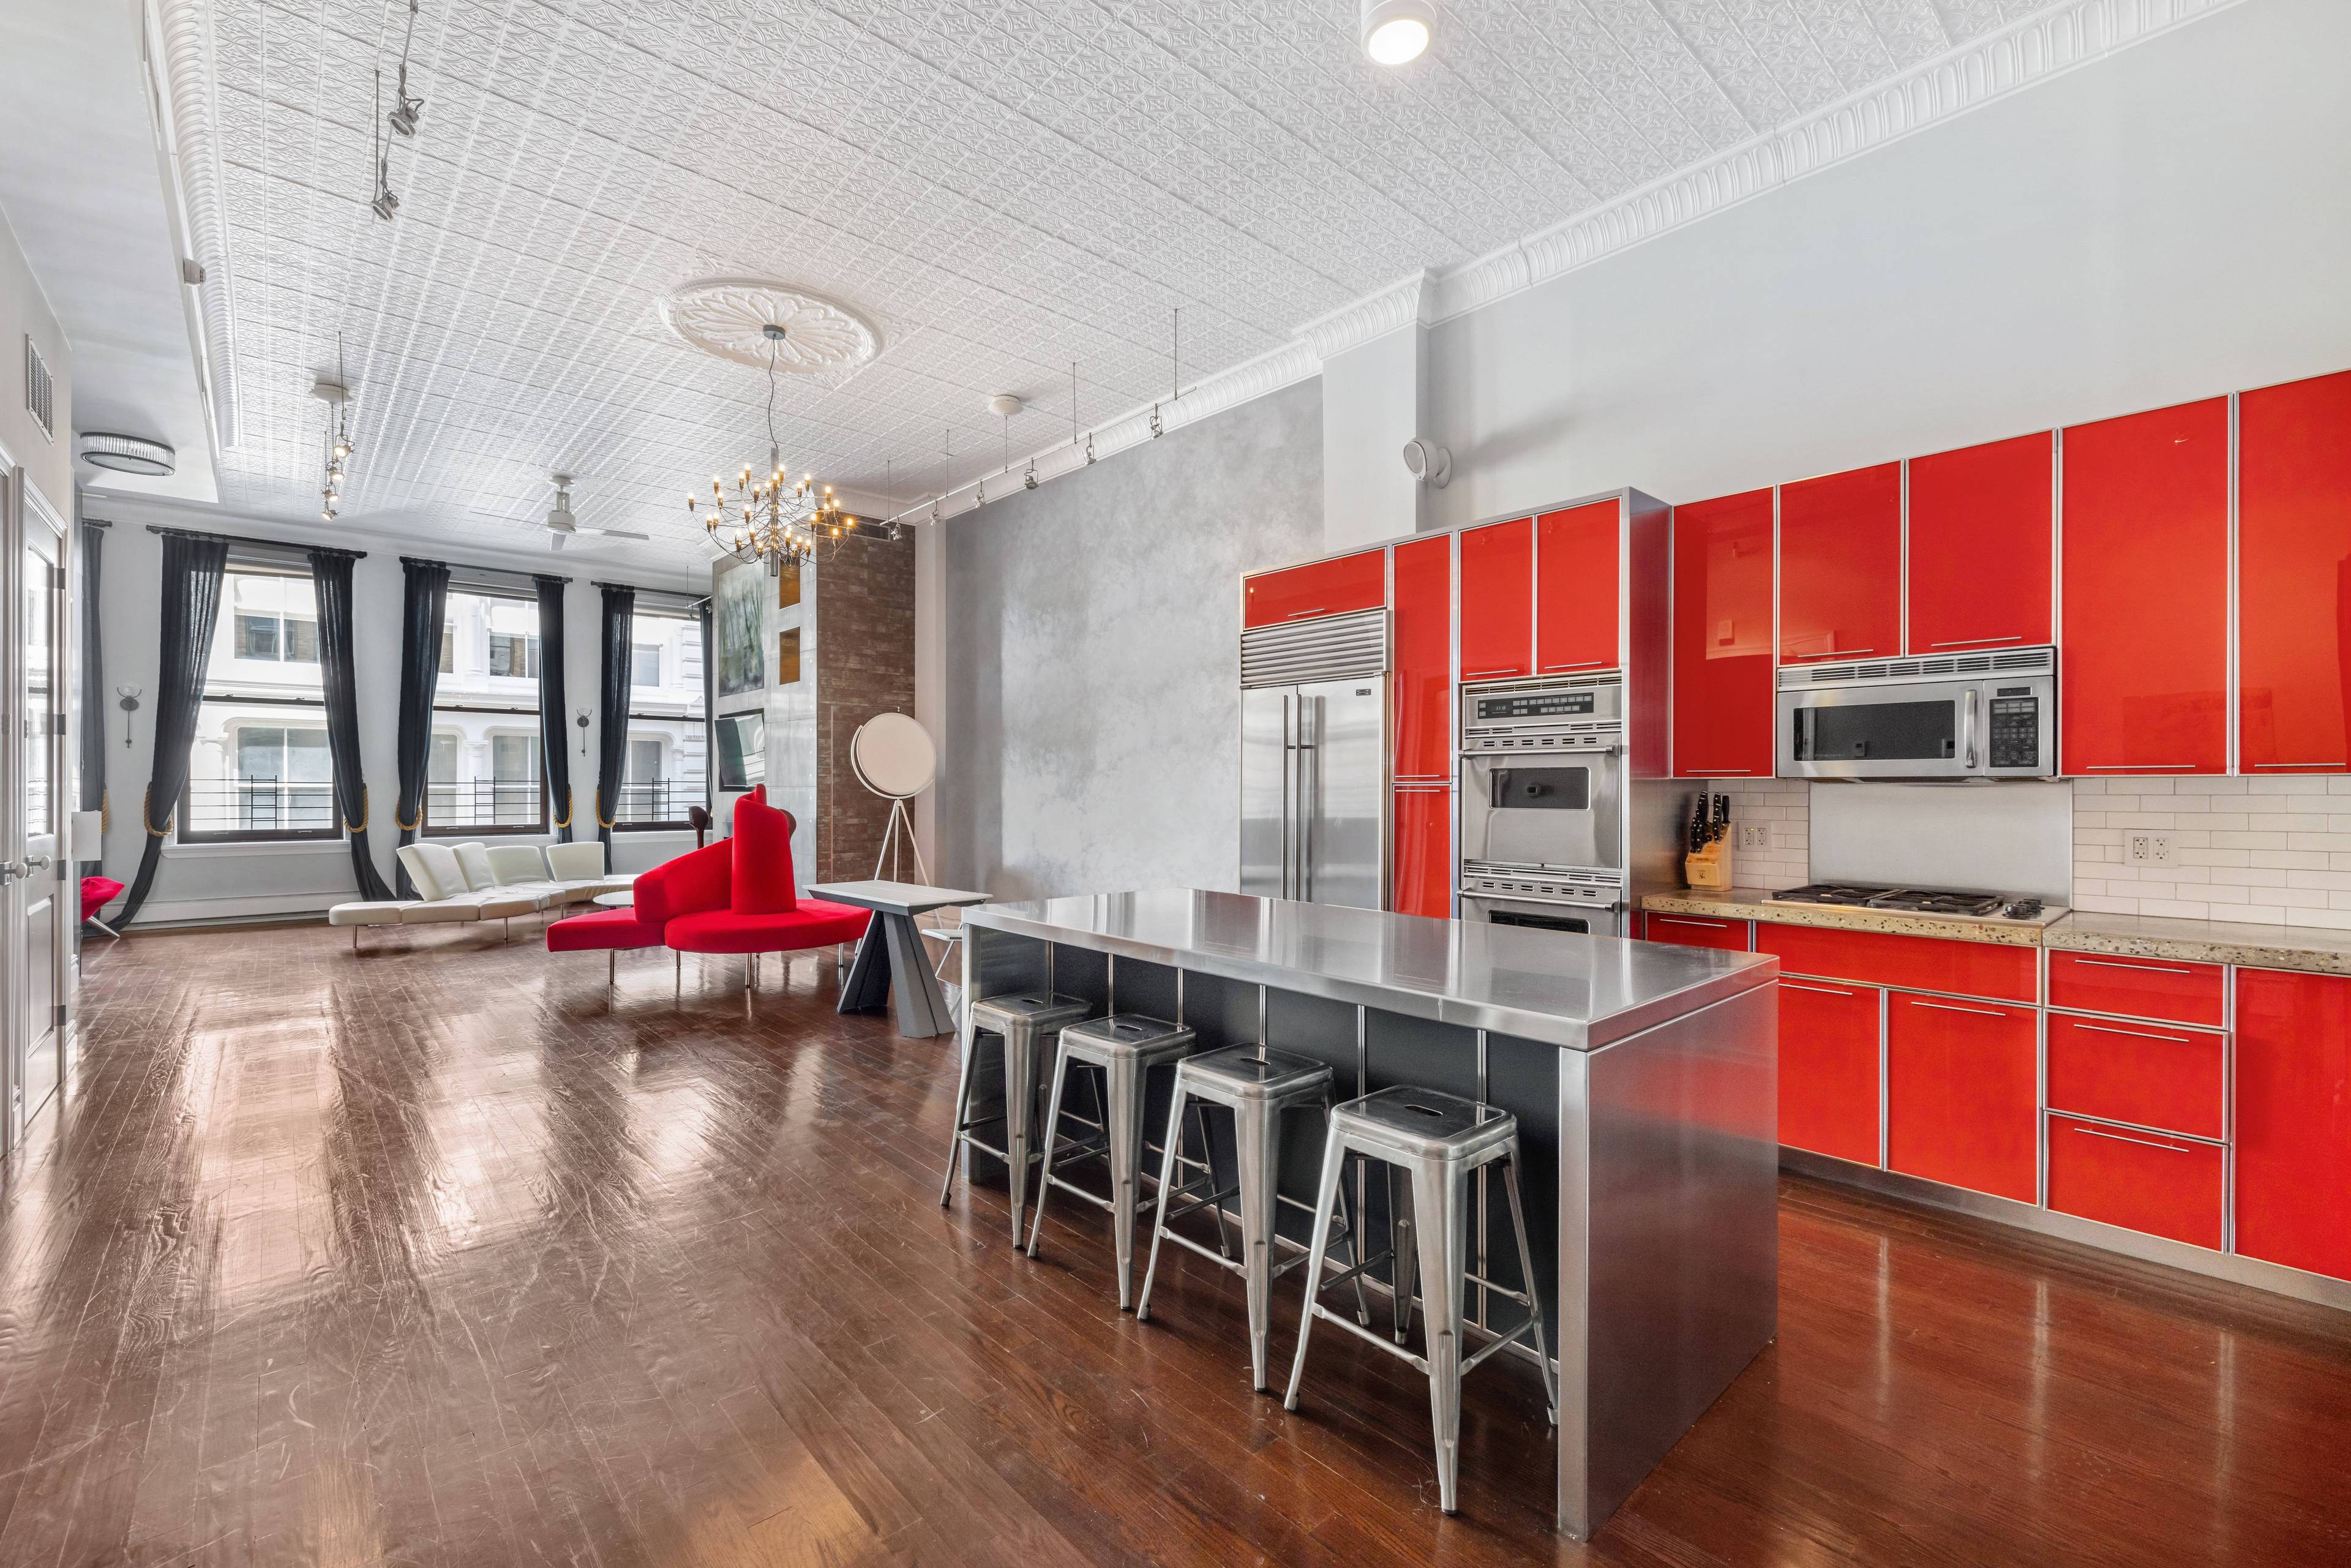 Introducing a Radiant SoHo Loft with Abundant Natural Light and 13 Foot Ceilings.